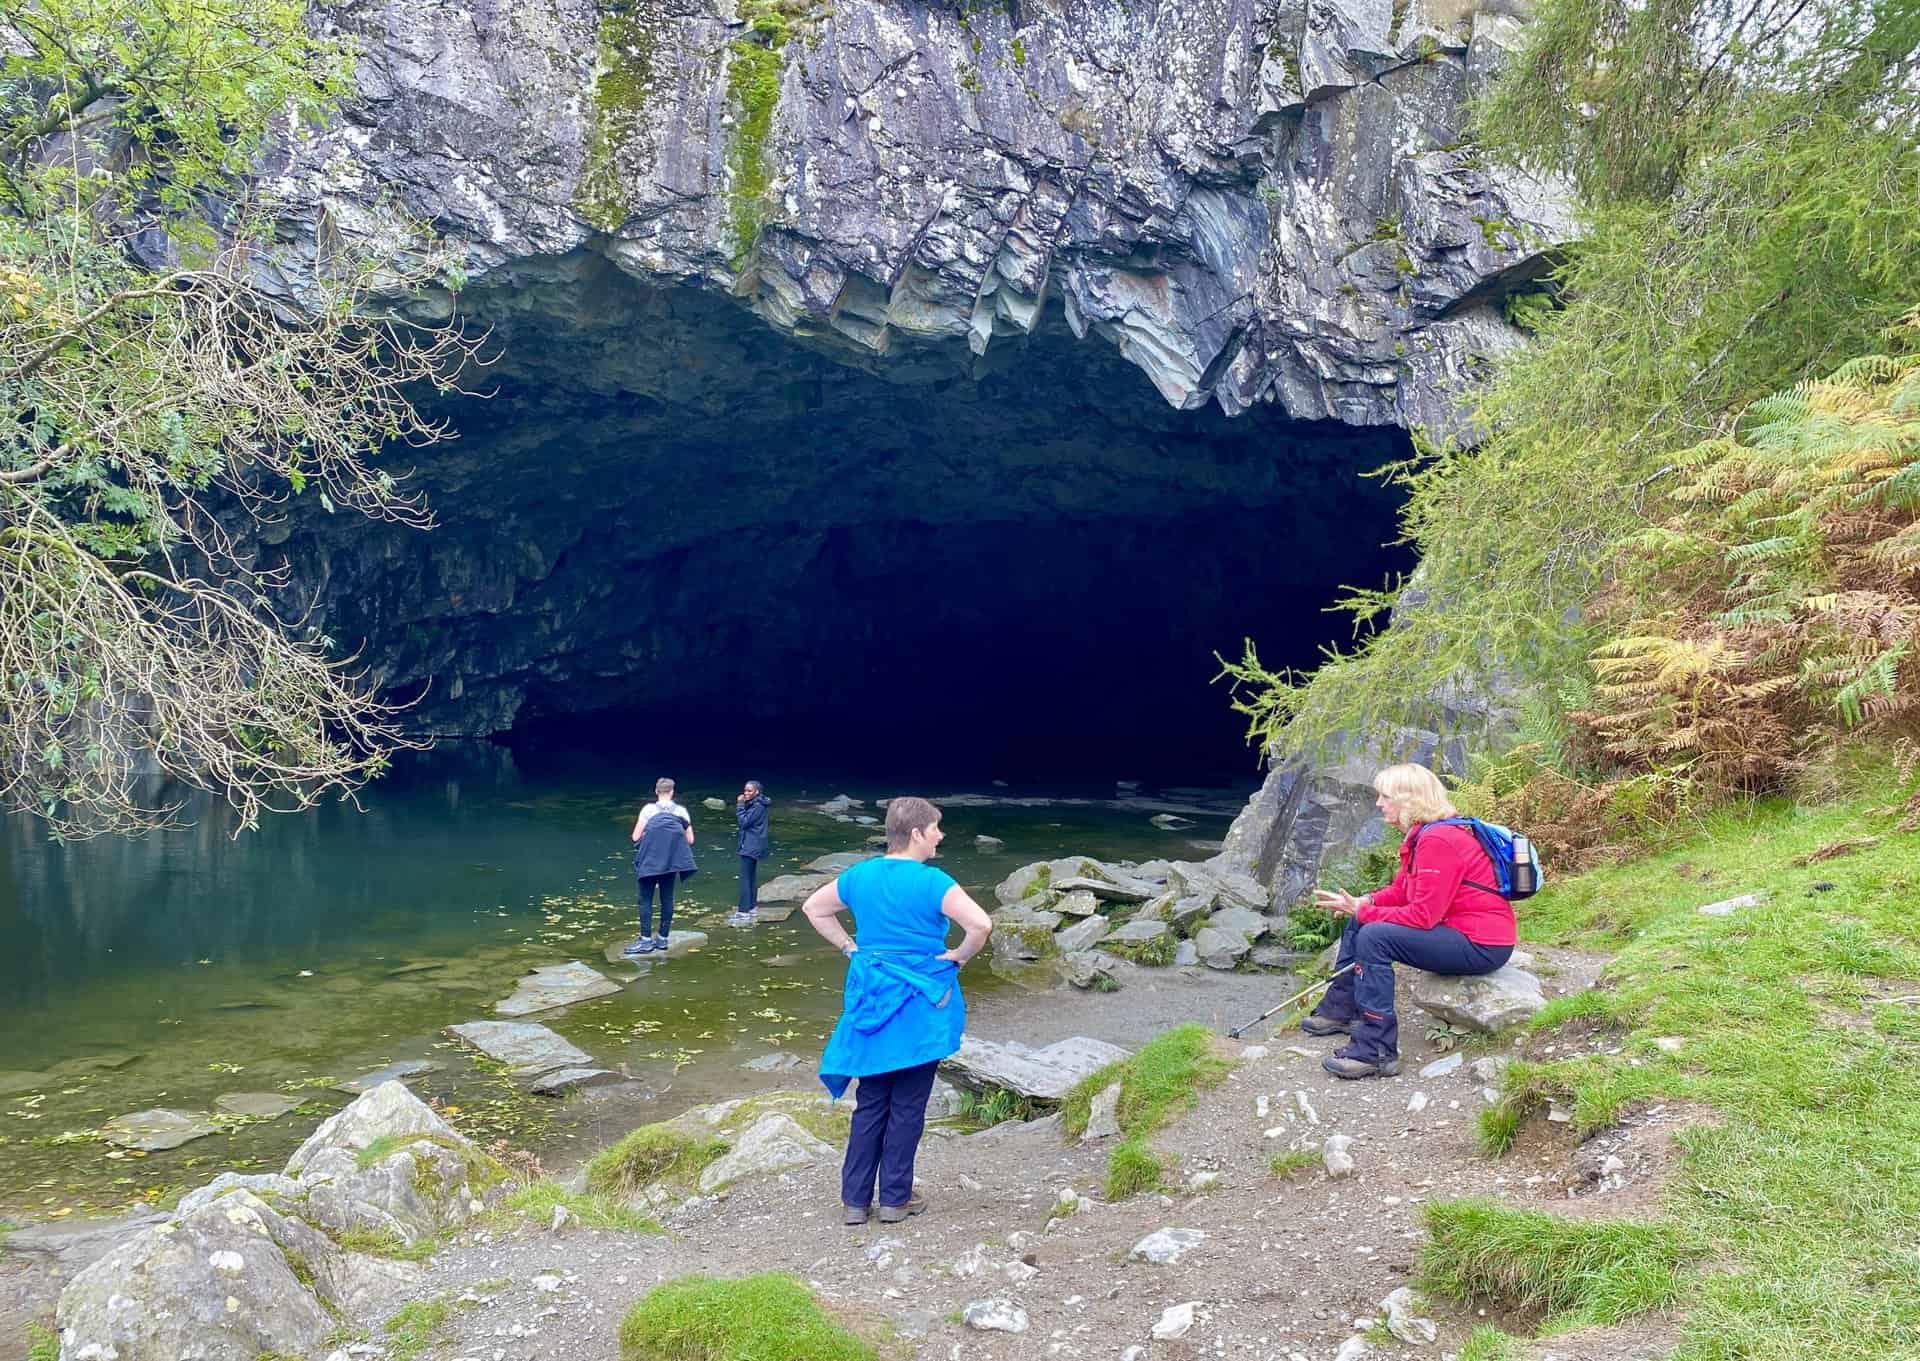 Rydal Cave. A man-made cave on the site of a former slate quarry, with stepping stones leading to a partially dry interior.